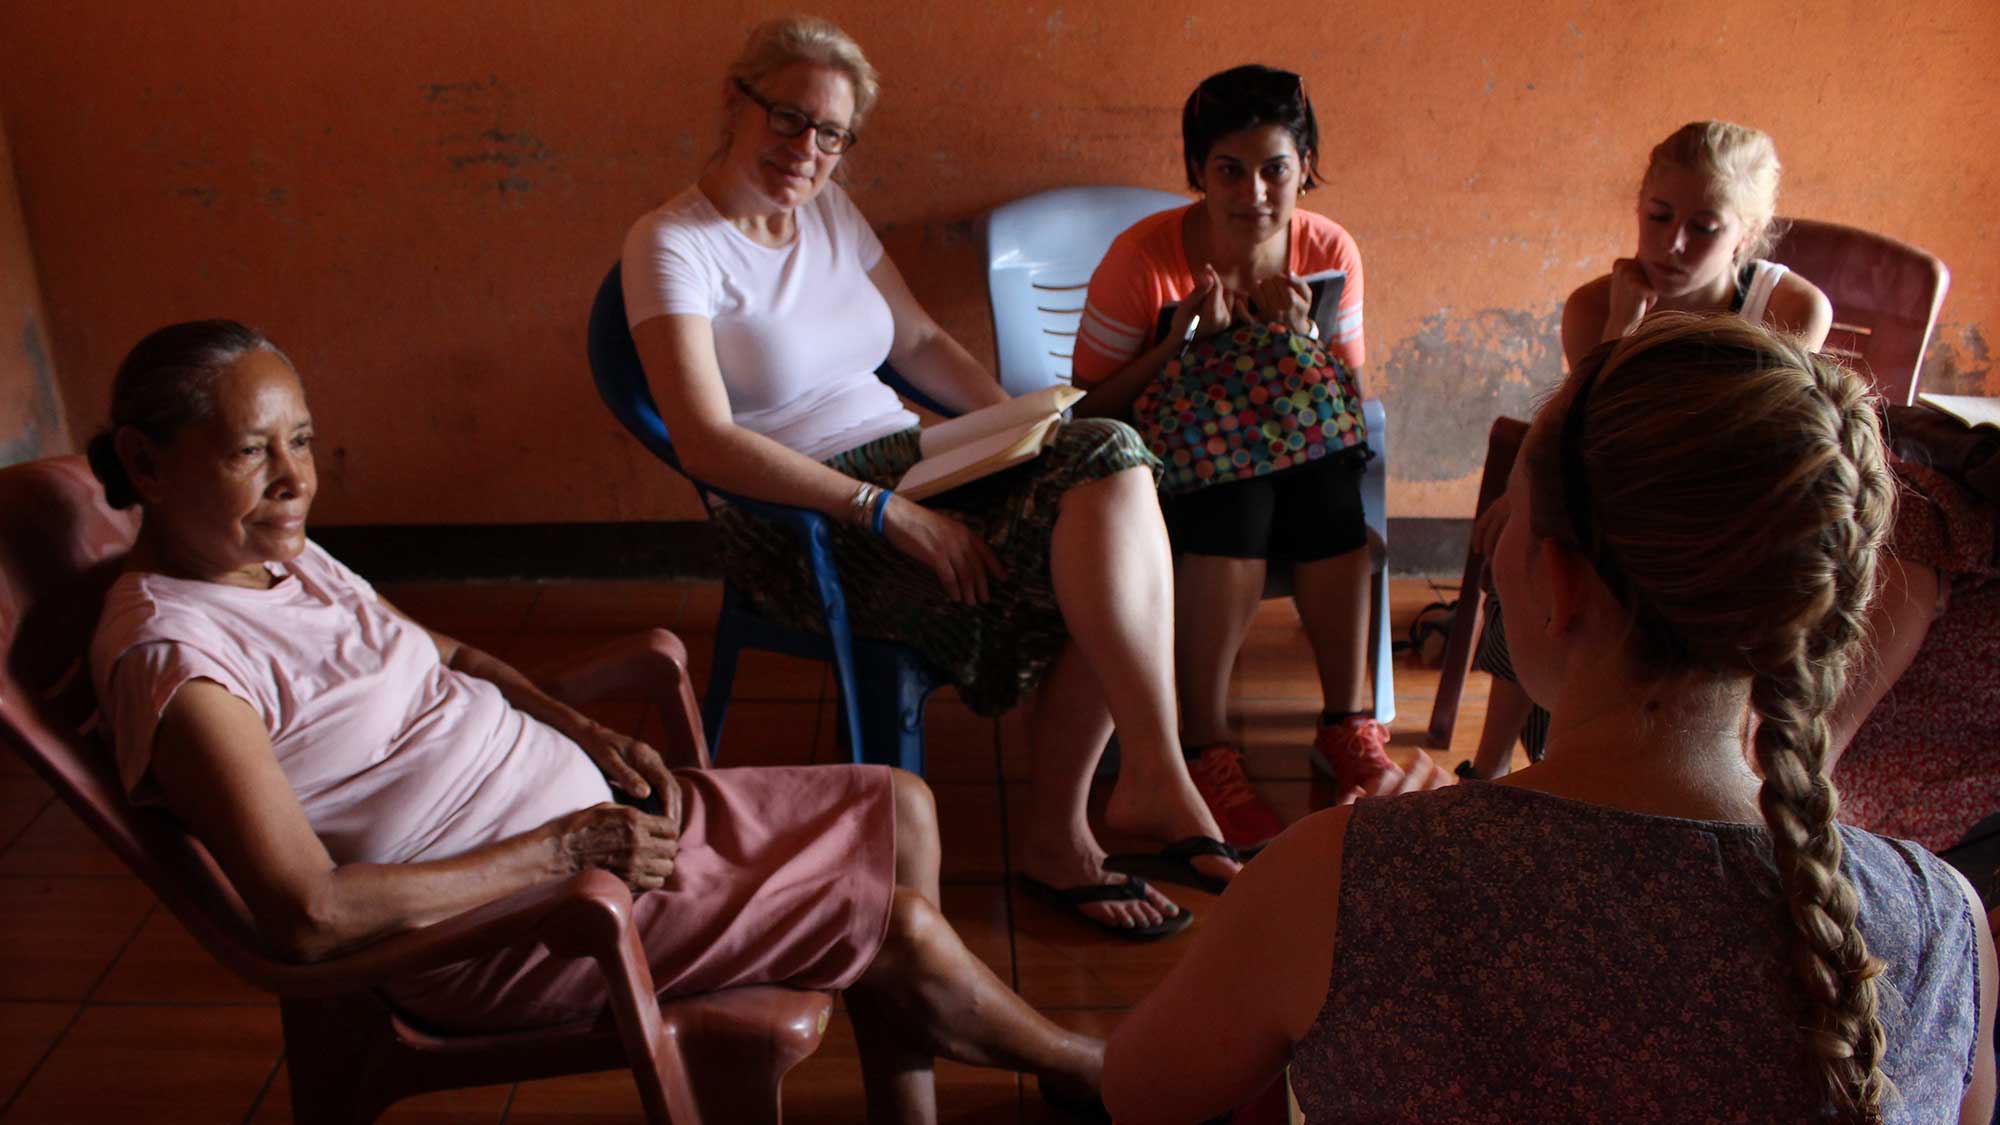 Focus group carried out by Seattle University and UCA-Managua students